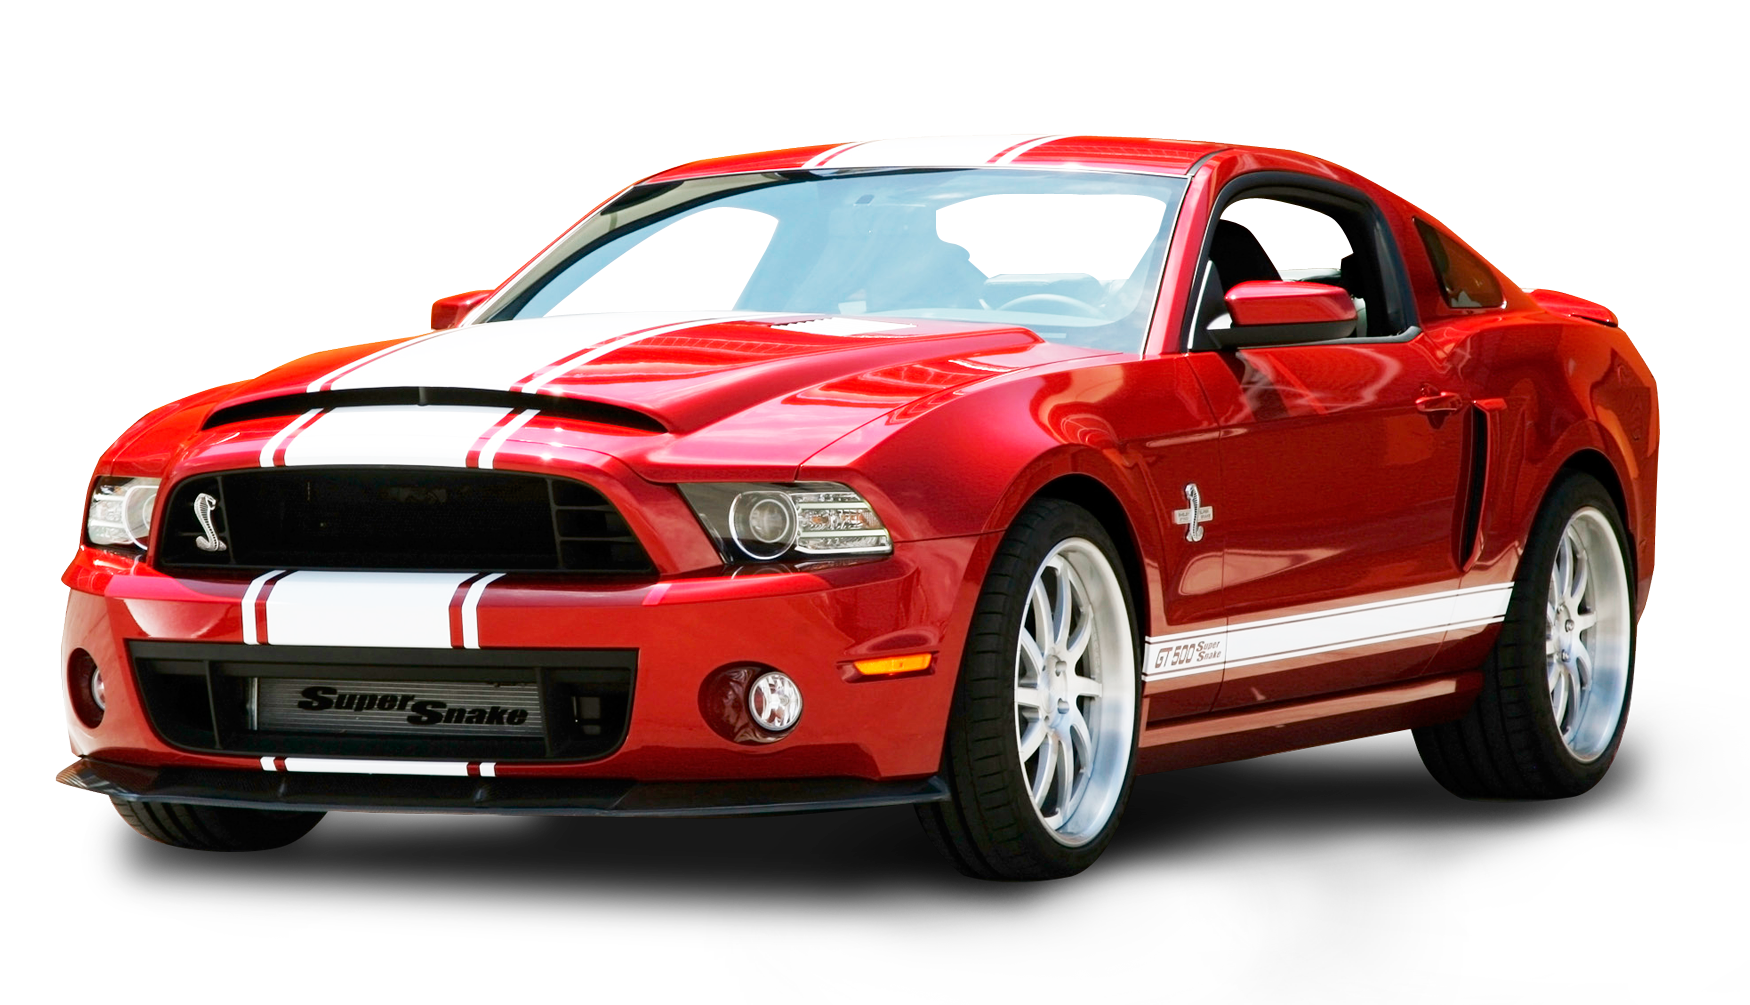 Ford Mustang Shelby GT500 Car PNG Image